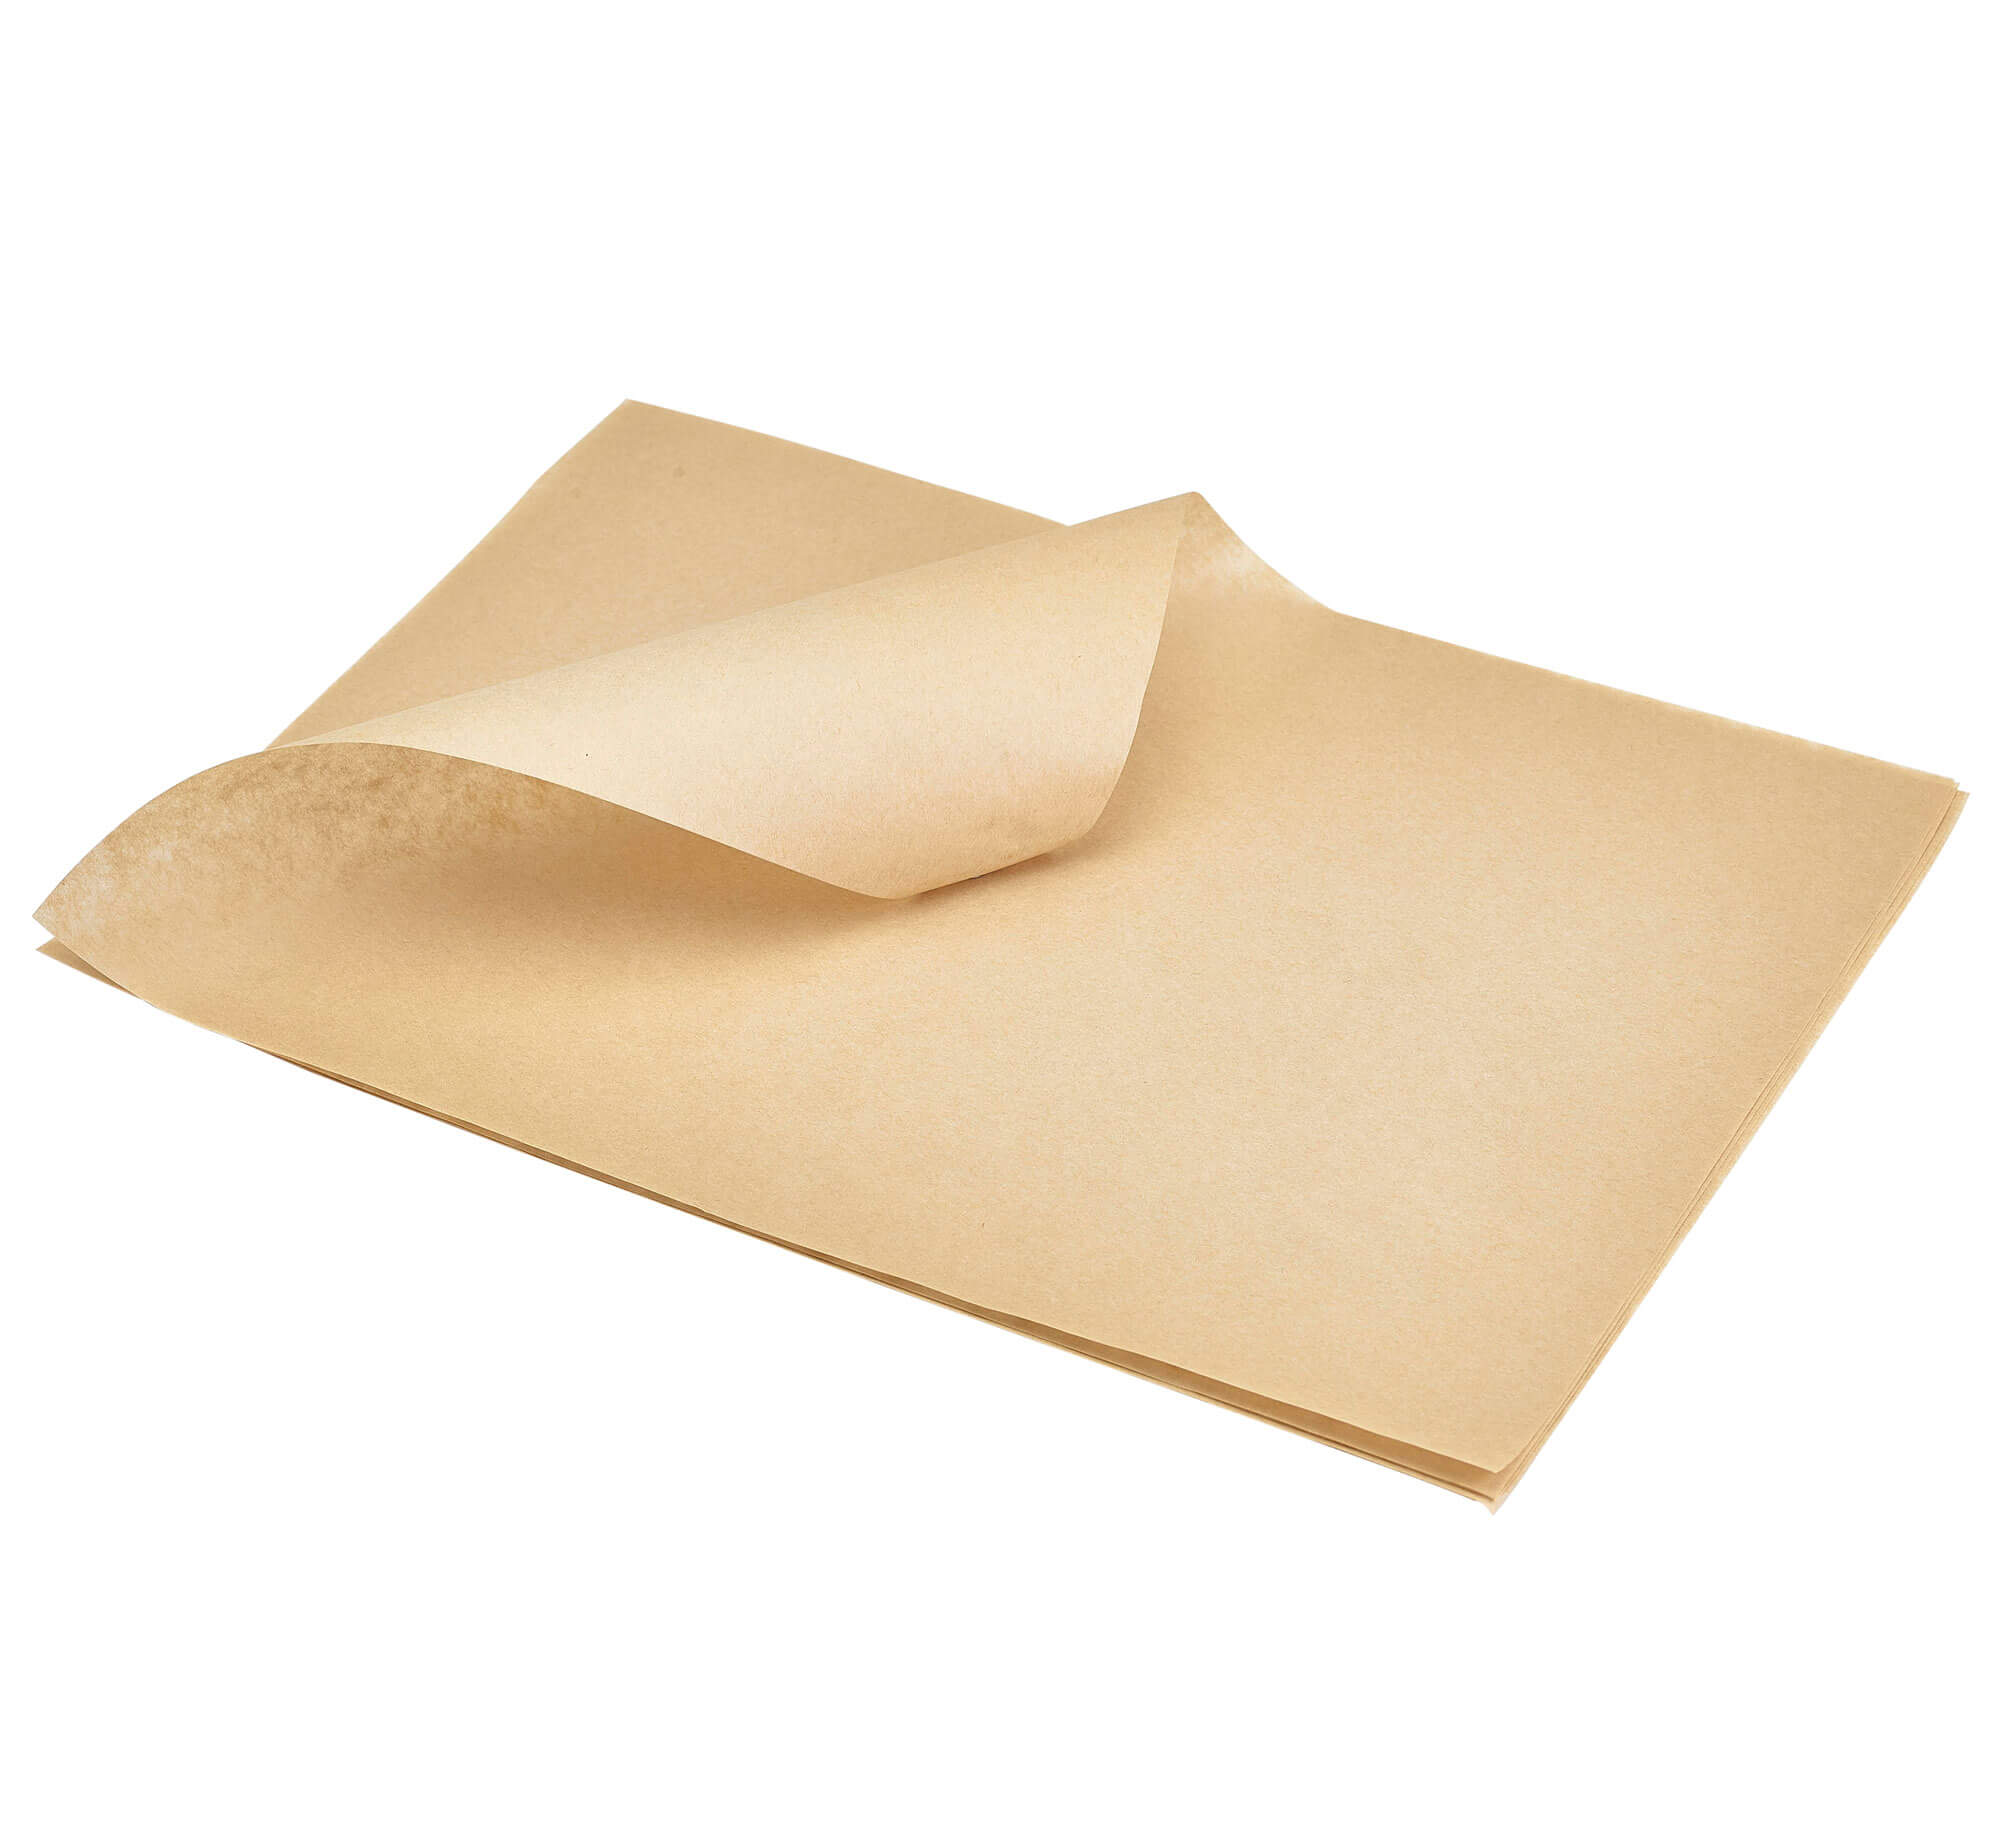 Grease-proof paper, brown - 35x25cm (1000 pcs.)